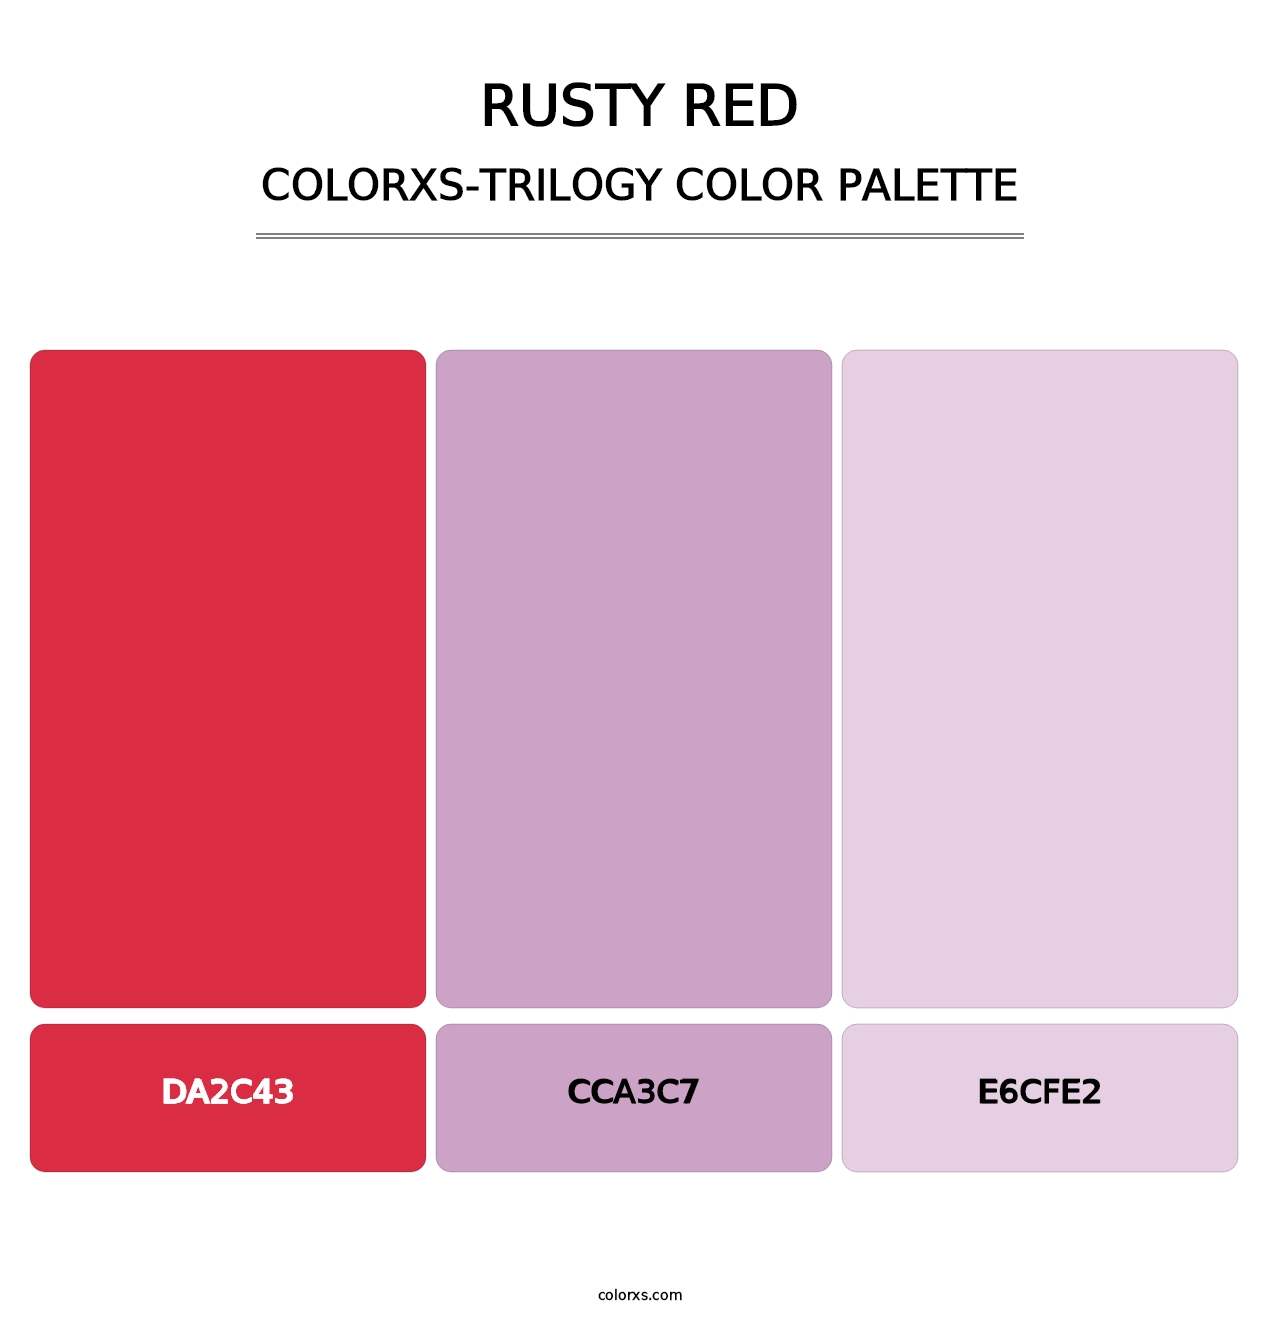 Rusty Red - Colorxs Trilogy Palette